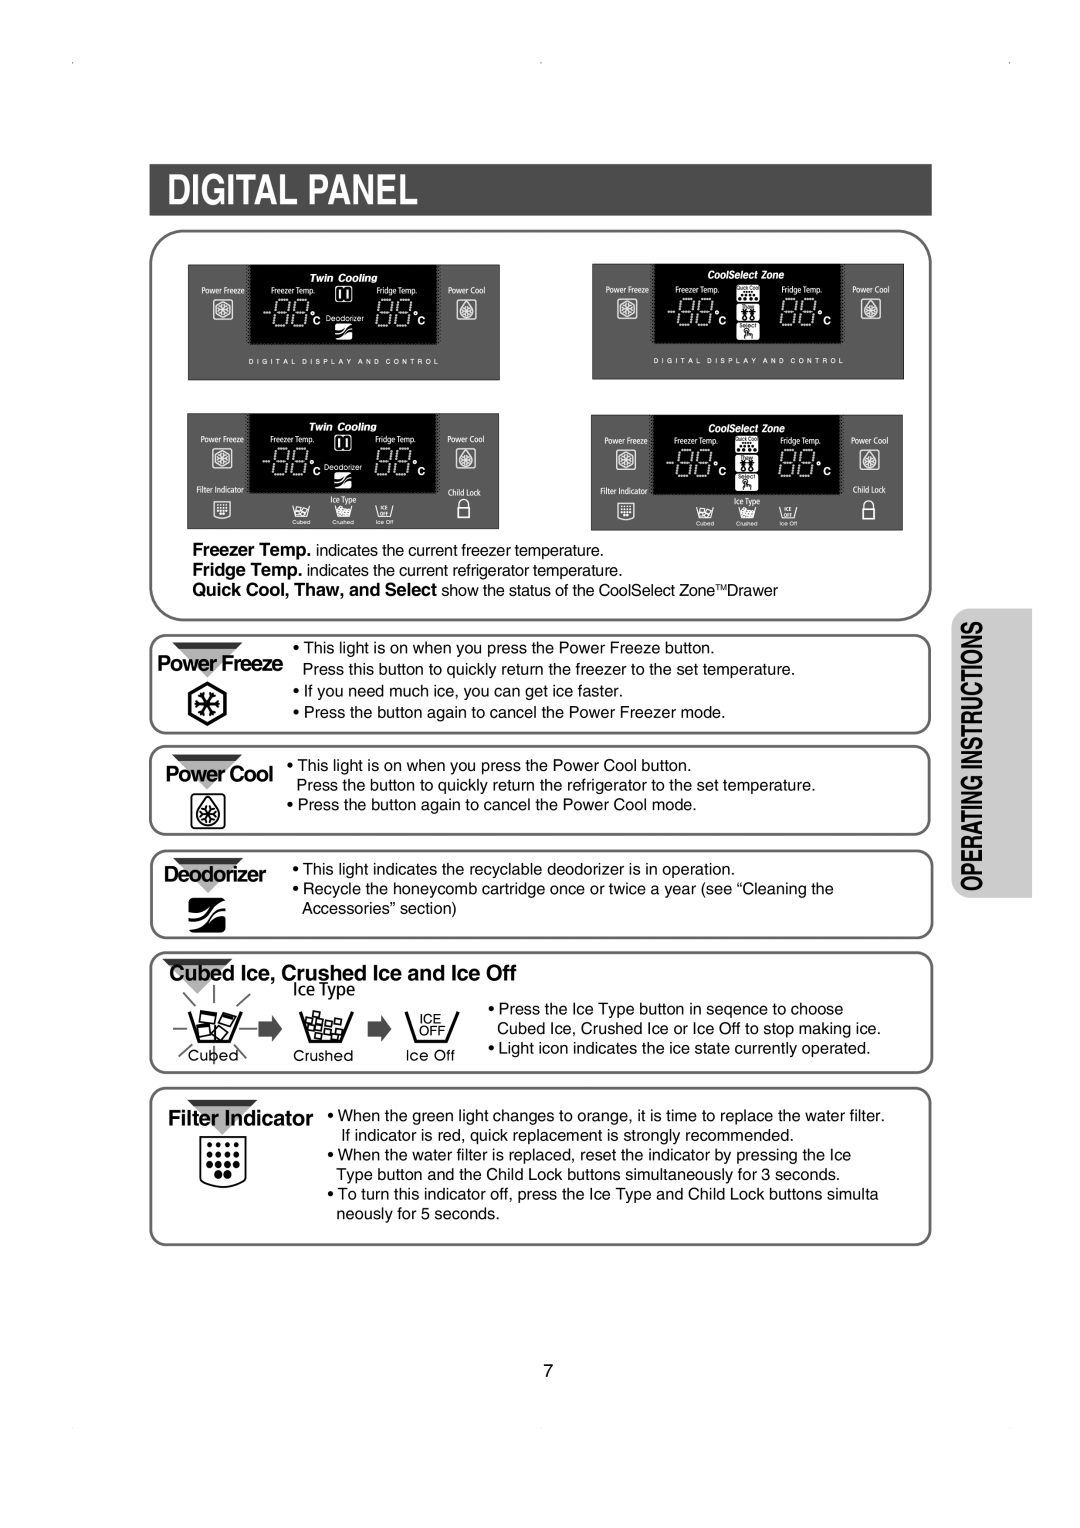 Samsung RS23FESW owner manual Digital Panel, Power Cool Deodorizer, Cubed Ice, Crushed Ice and Ice Off, Power Freeze 